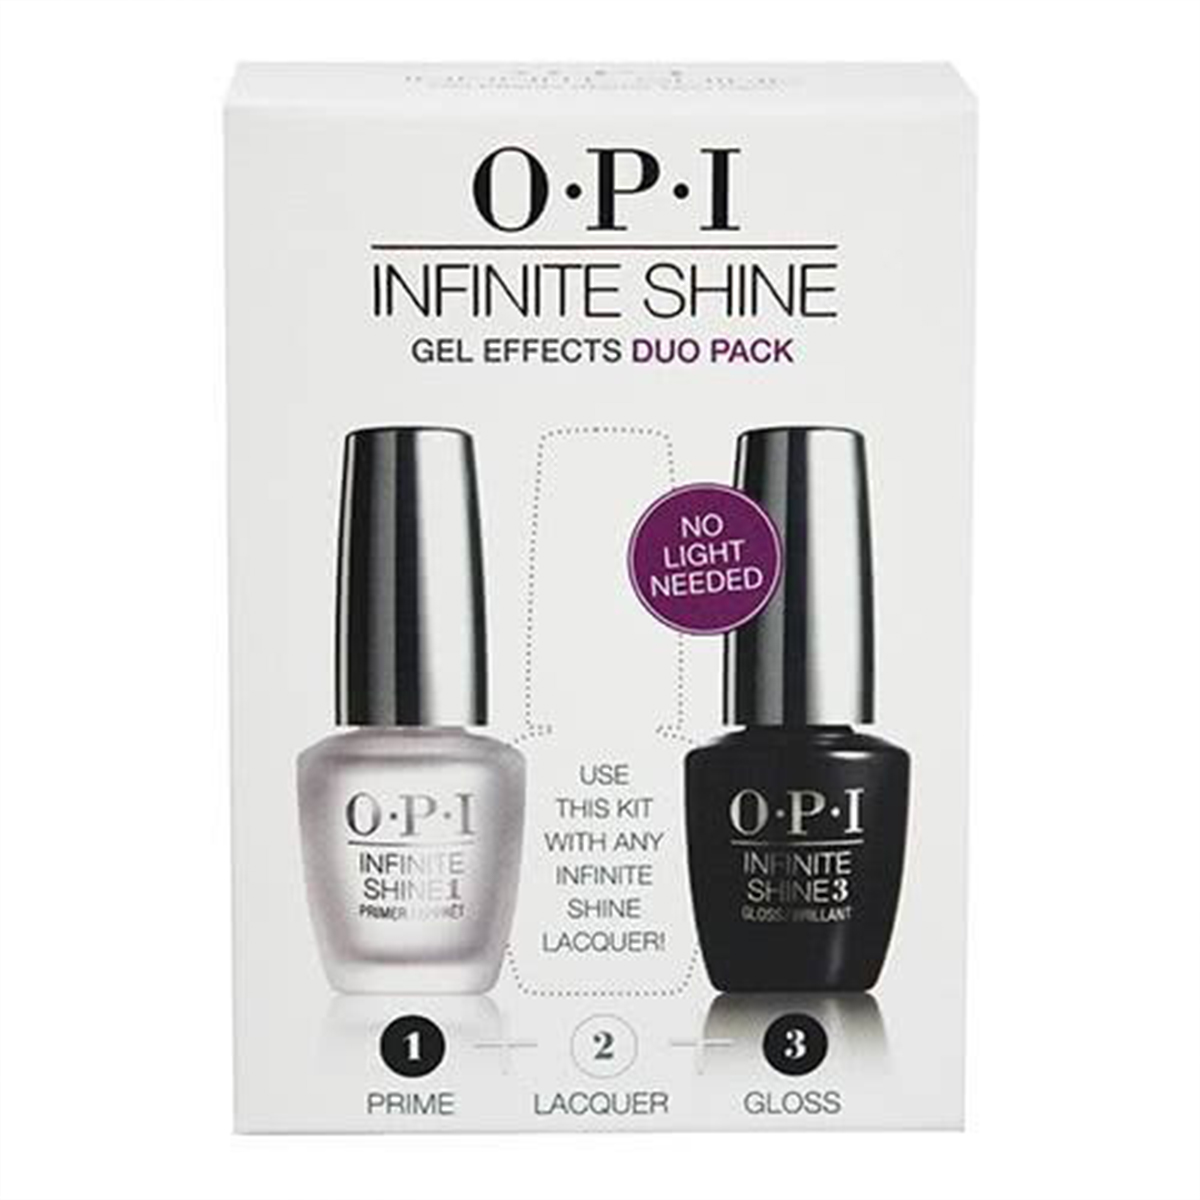 Box featuring two bottles of Opi nail polish on the front